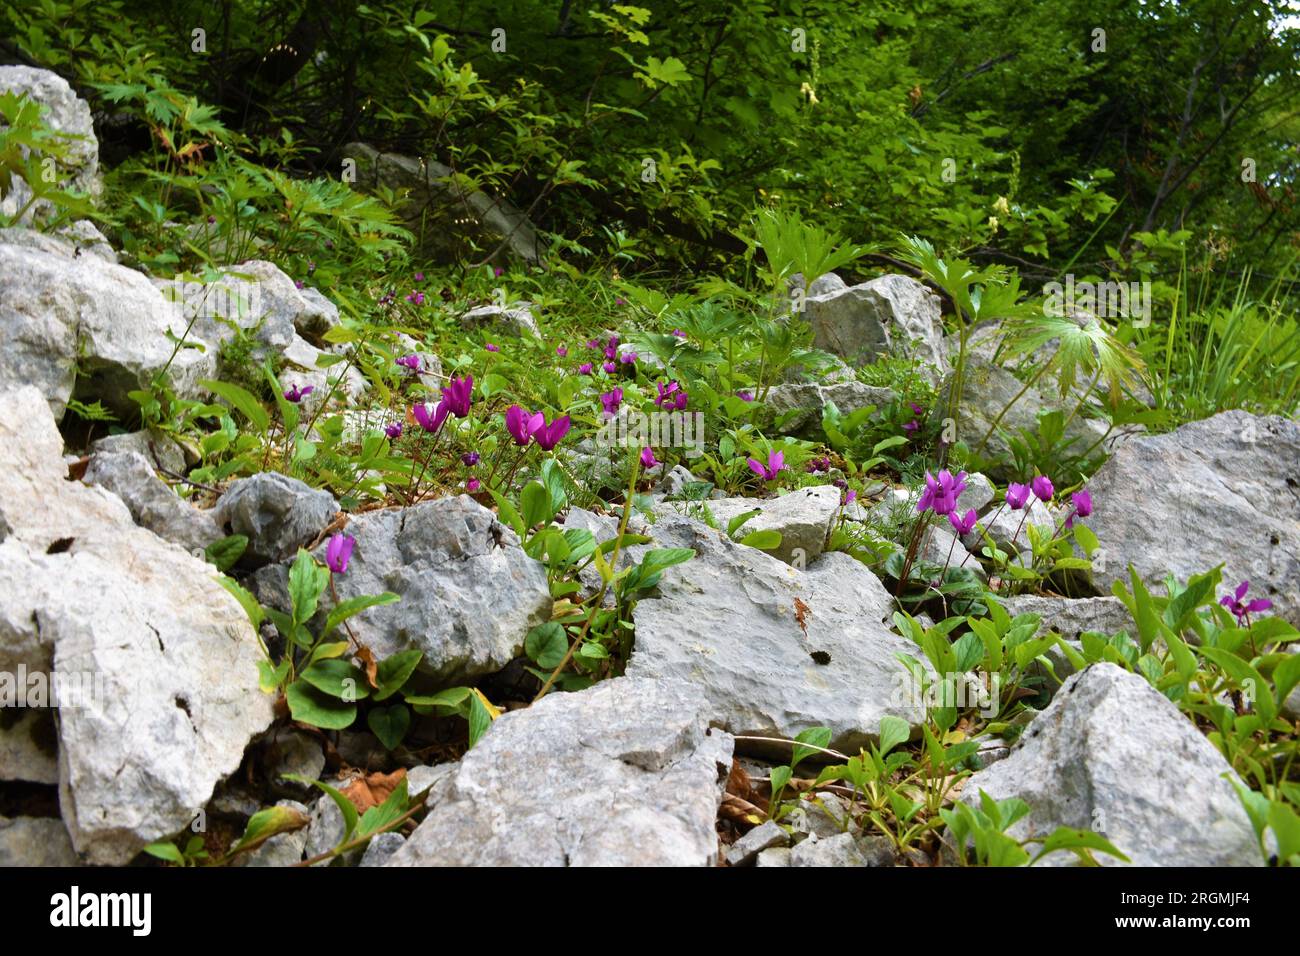 Close up of a group of purple cyclamen (Cyclamen purpurascens) flowers growing from between the rocks Stock Photo